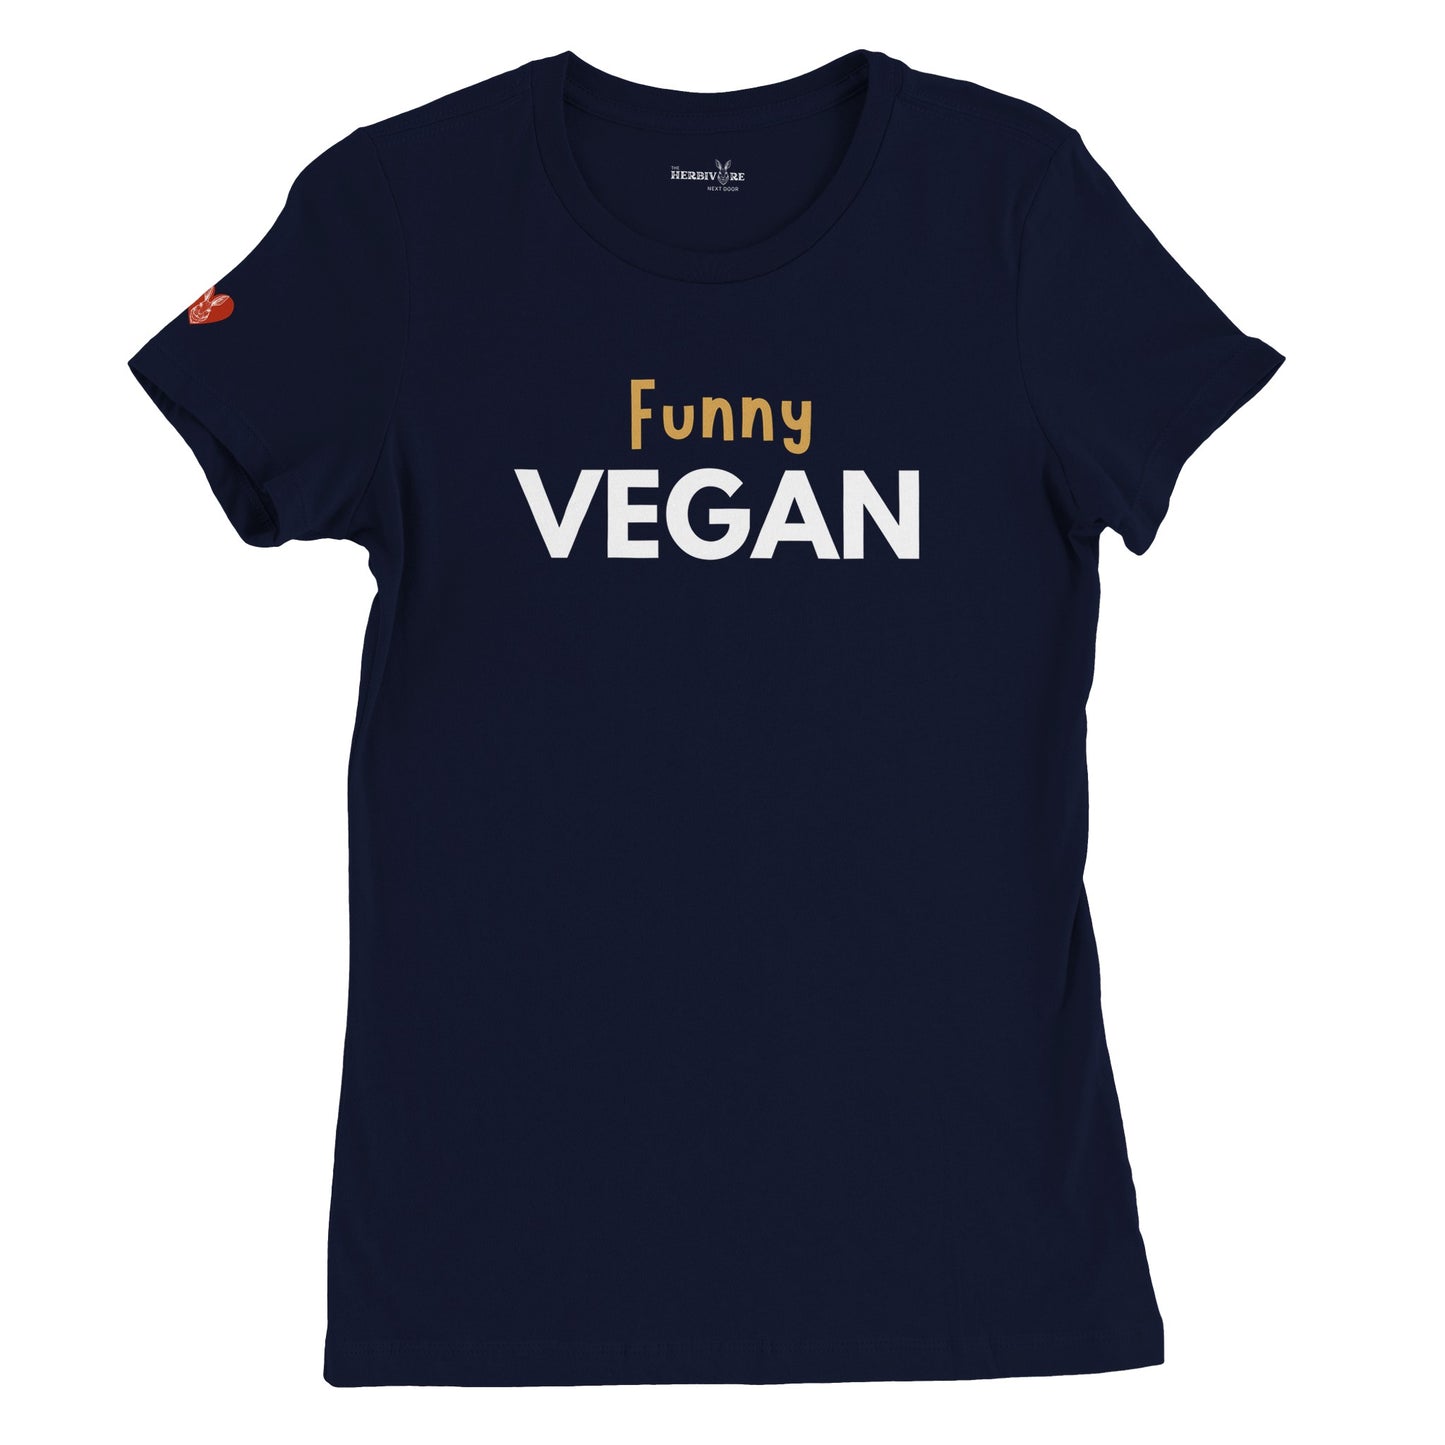 Funny Vegan - Women's style (Women's run small - get one size up from normal unisex)